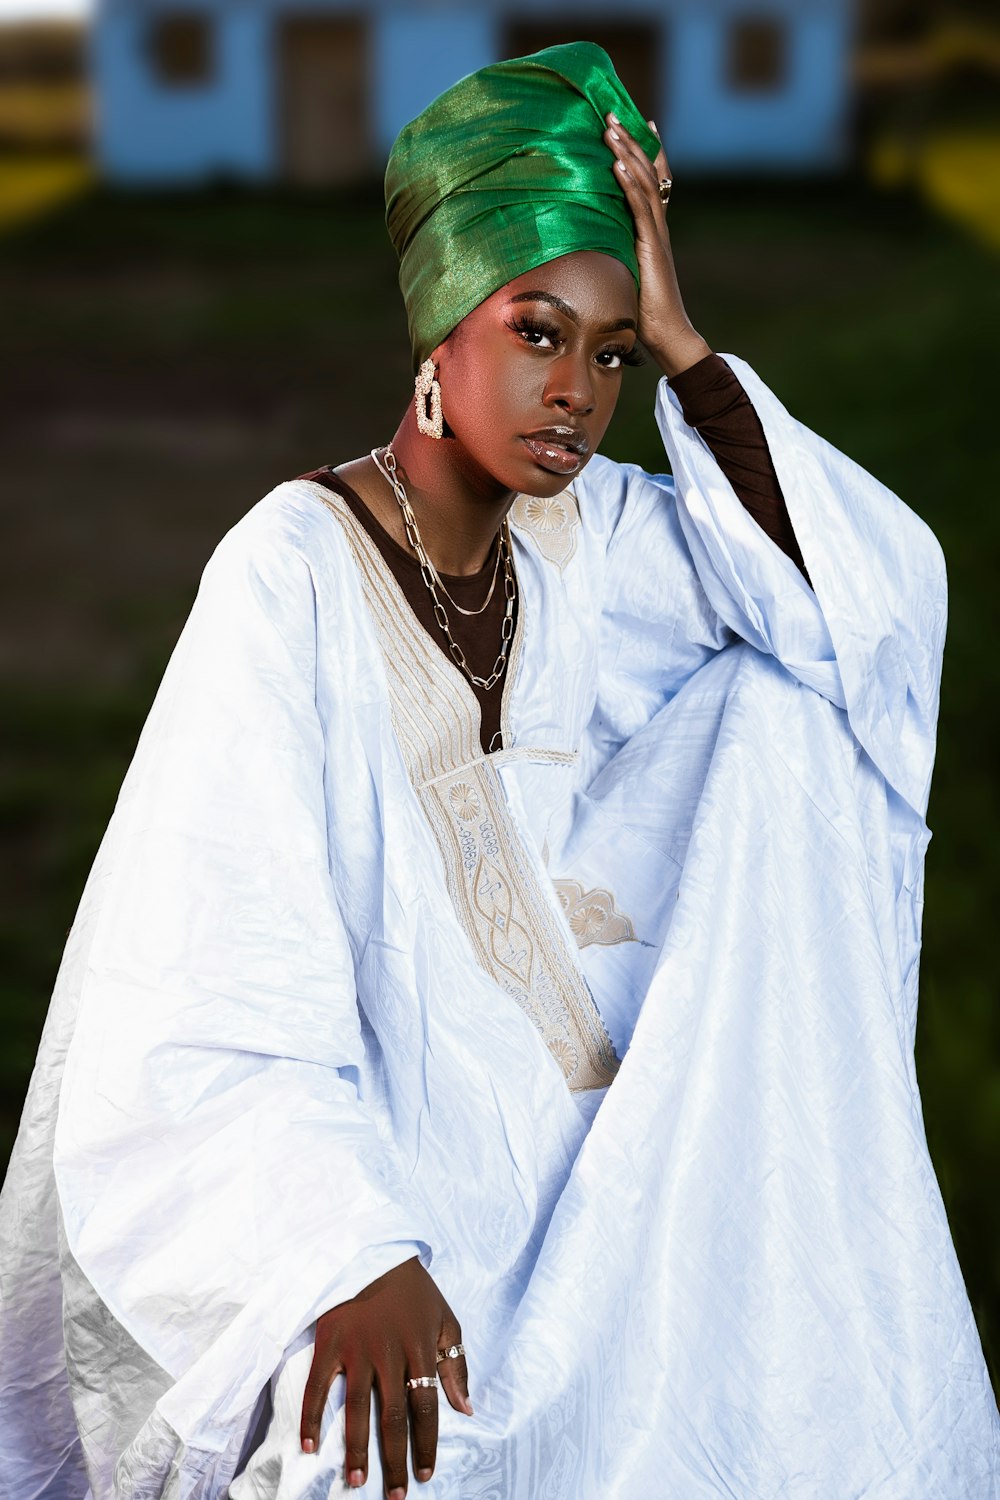 a woman with a green turban on her head